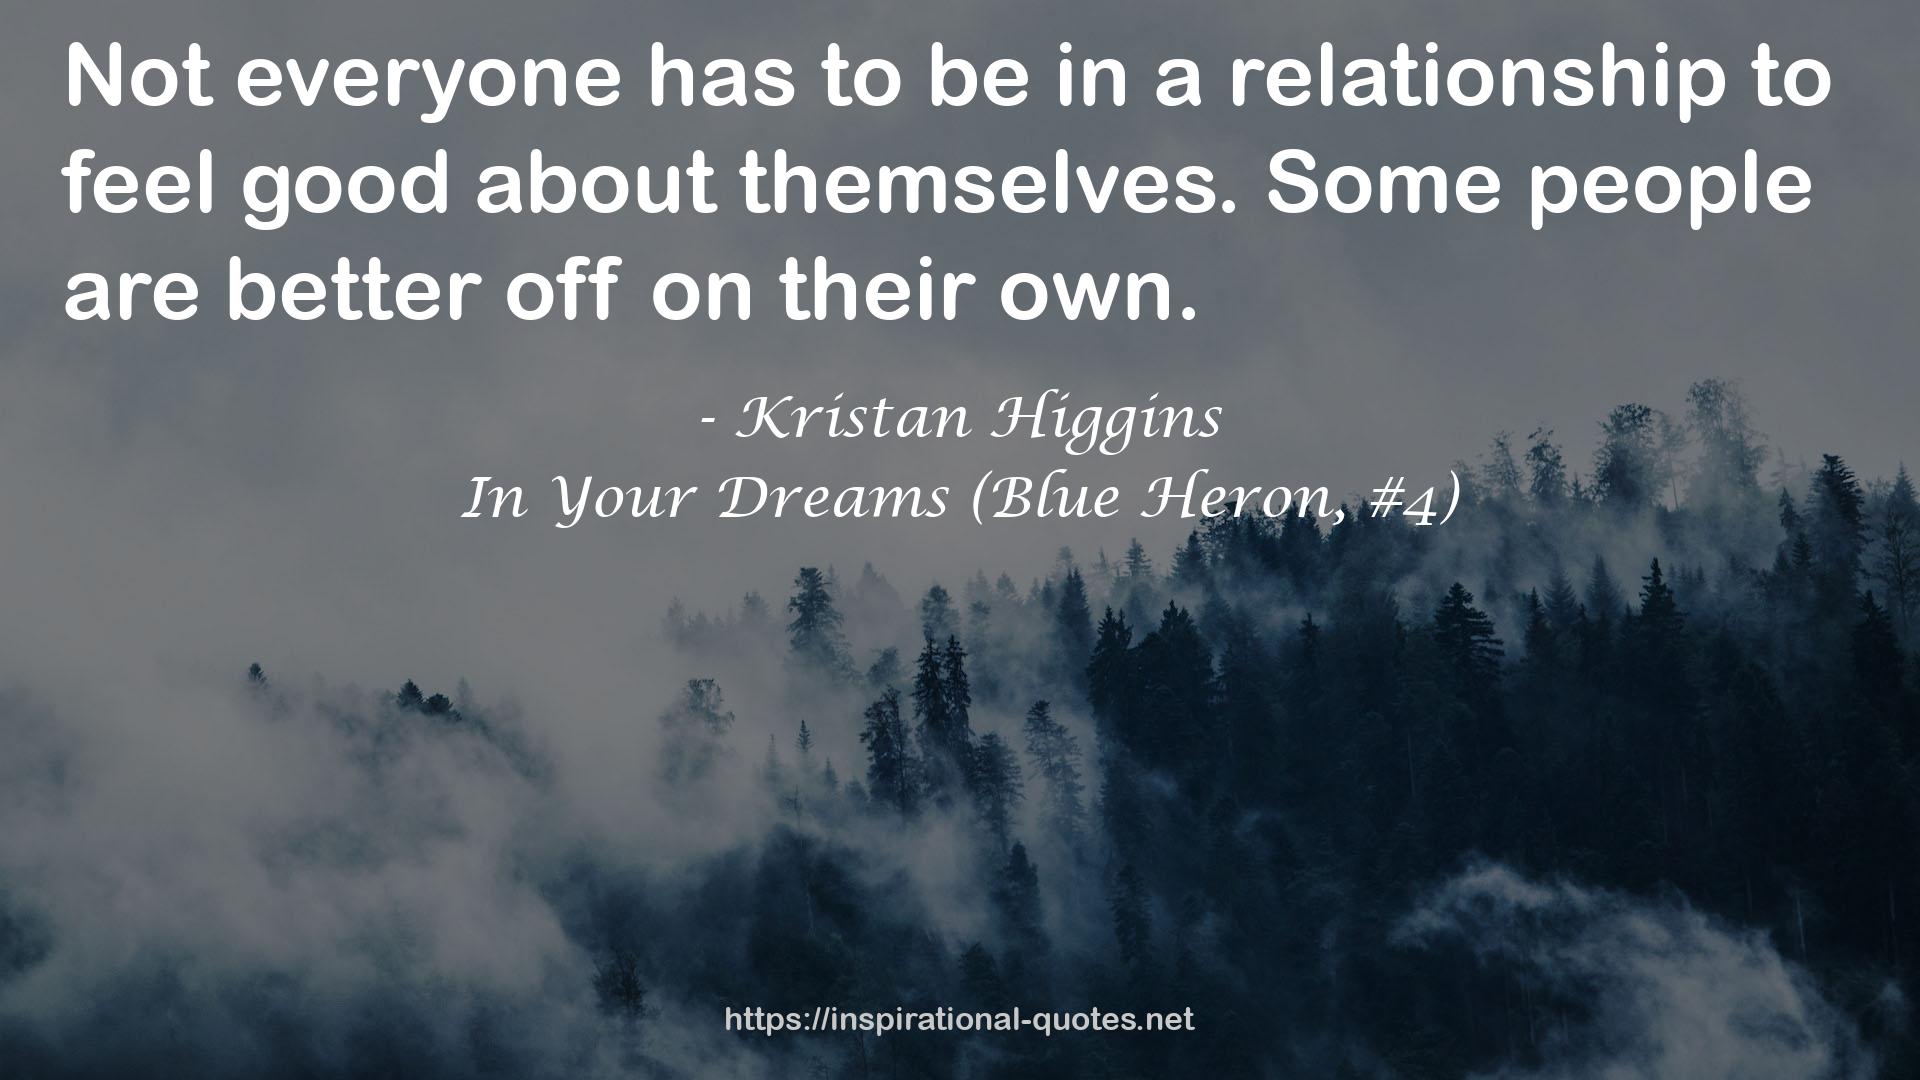 In Your Dreams (Blue Heron, #4) QUOTES